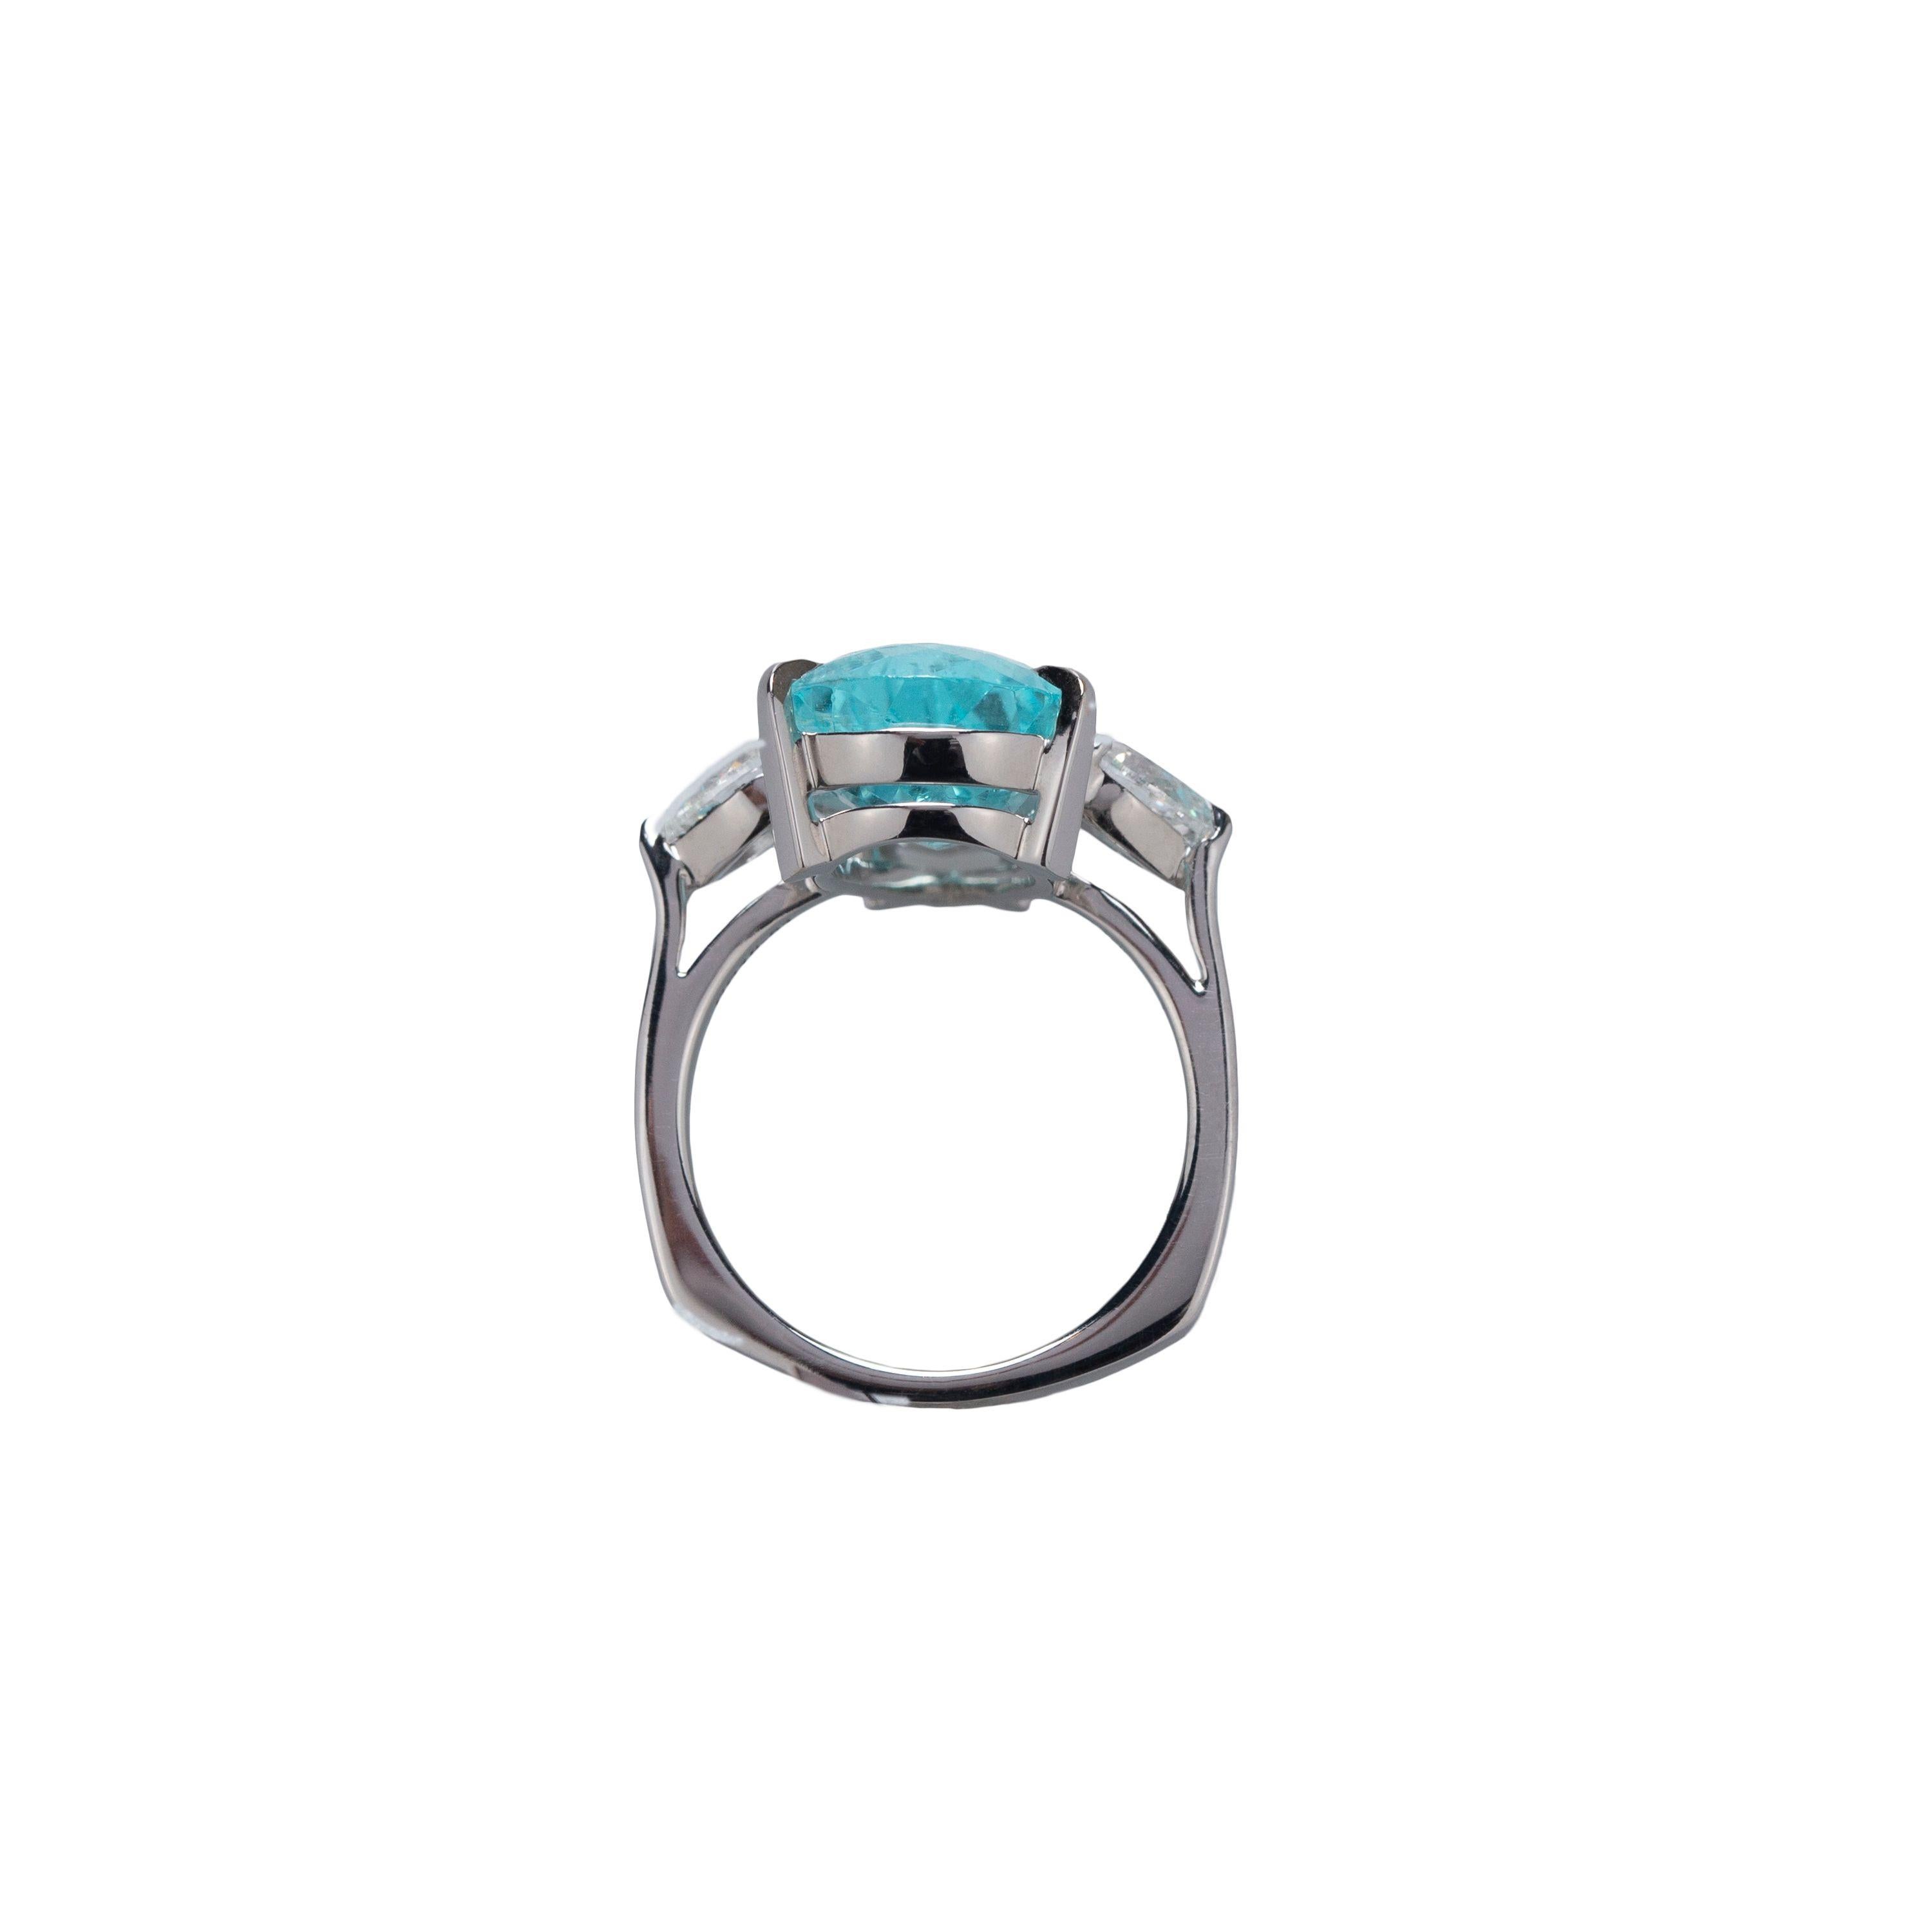 Designed exclusively by Ara Vartanian, this 18 Karat White Gold Ring features one 8.60 Carat Paraiba Tourmaline along with 0.93CT worth of White Diamonds.
For this ring is made exclusively by Ara Vartanian, bespoke alterations may be accommodated,